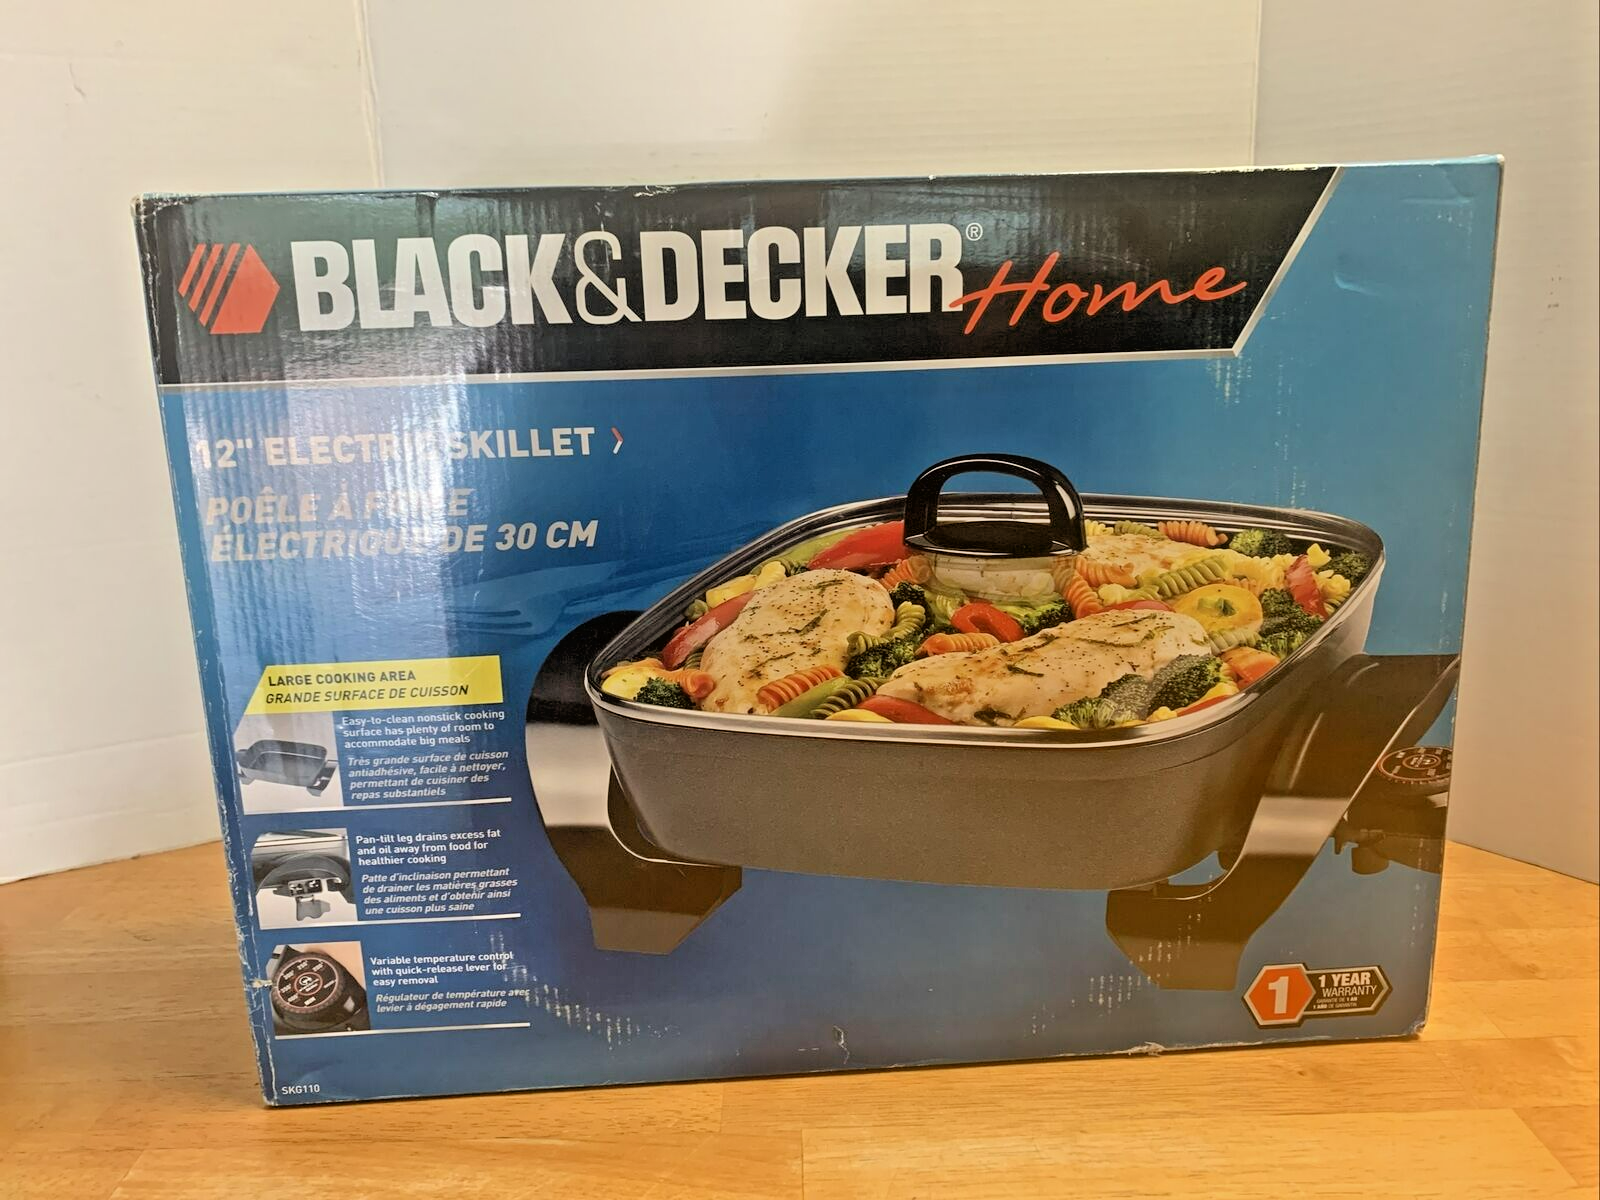 Black & Decker 12 Inch Electric Skillet with Glass Lid. A